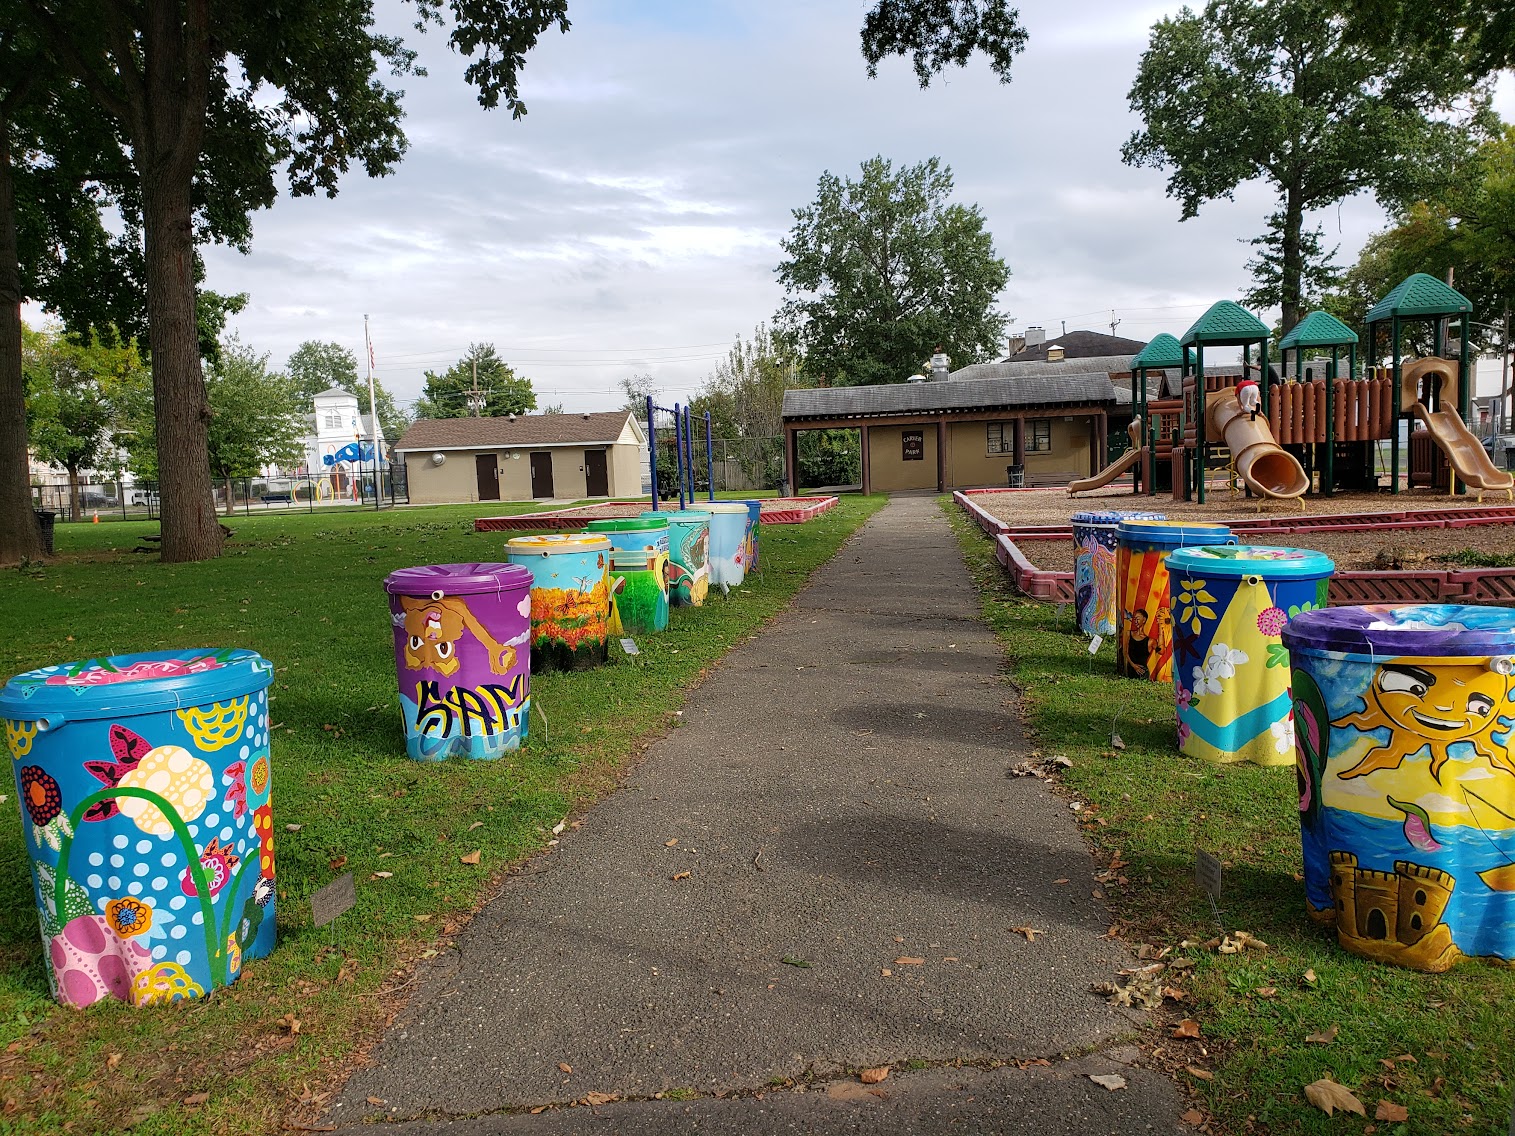 Painted rain barrels beautify a park and provide an example of a strategy to mitigate flooding.